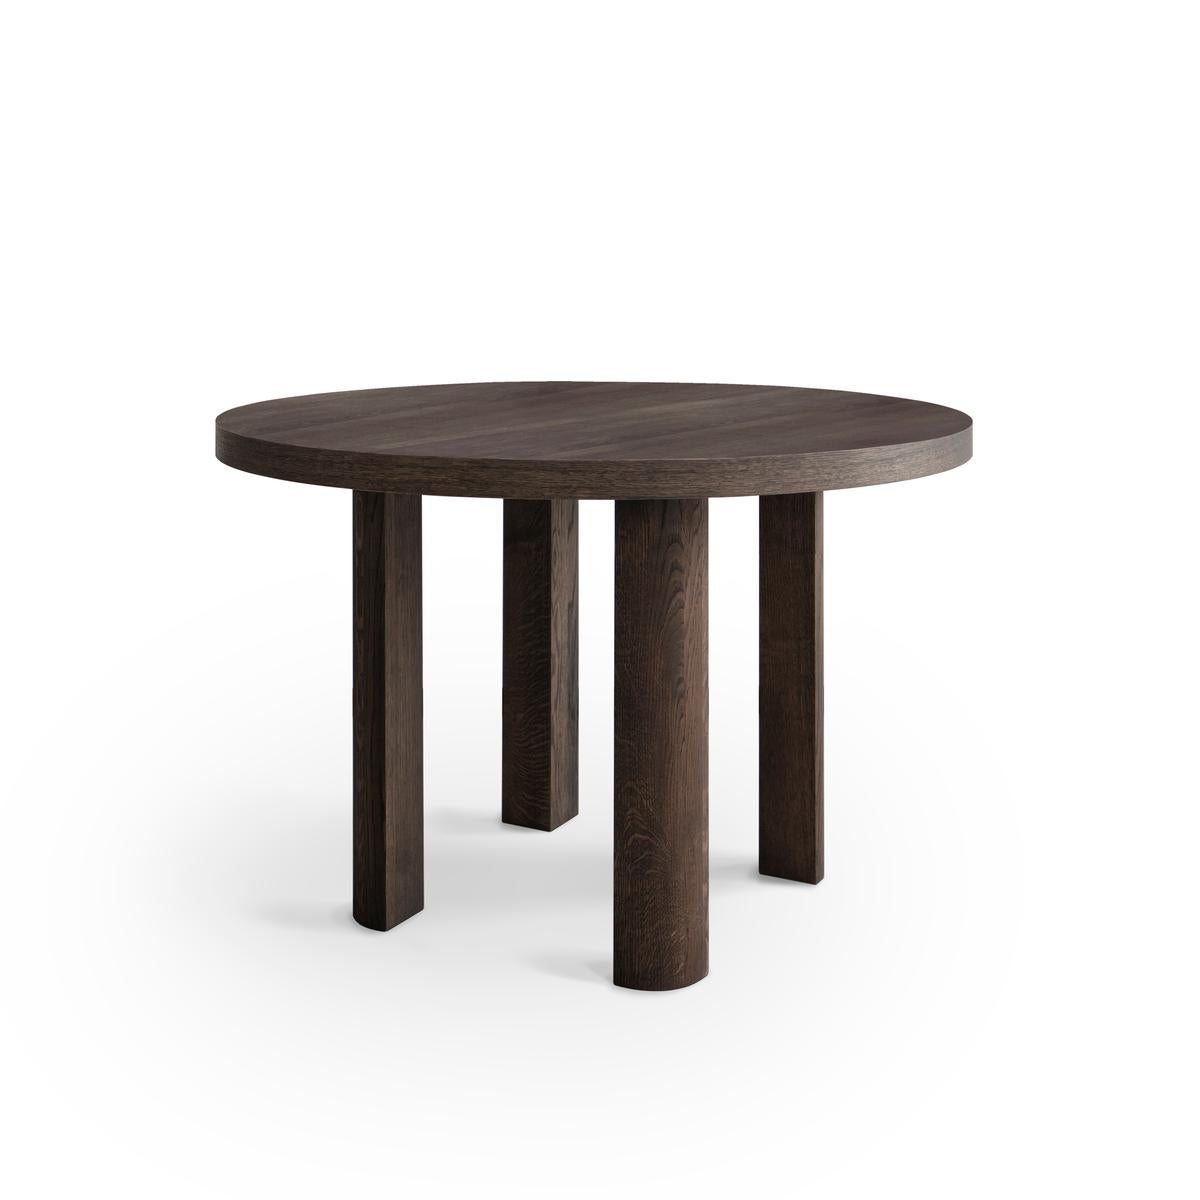 Danish Contemporary Round Table 'Quarter', Smoked Oak / White top For Sale